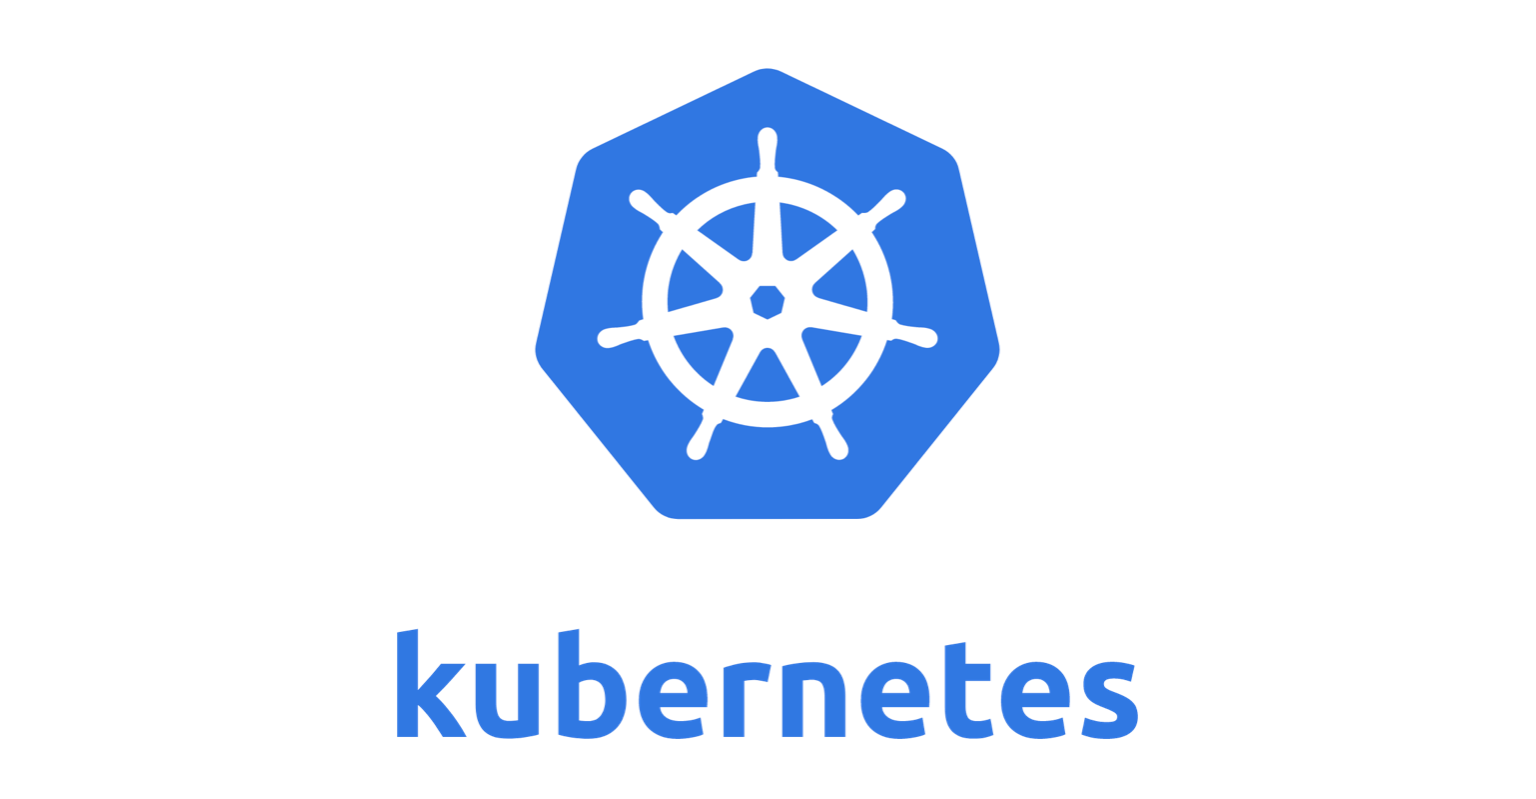 Why Is Storage On Kubernetes So Hard? - Software Engineering Daily